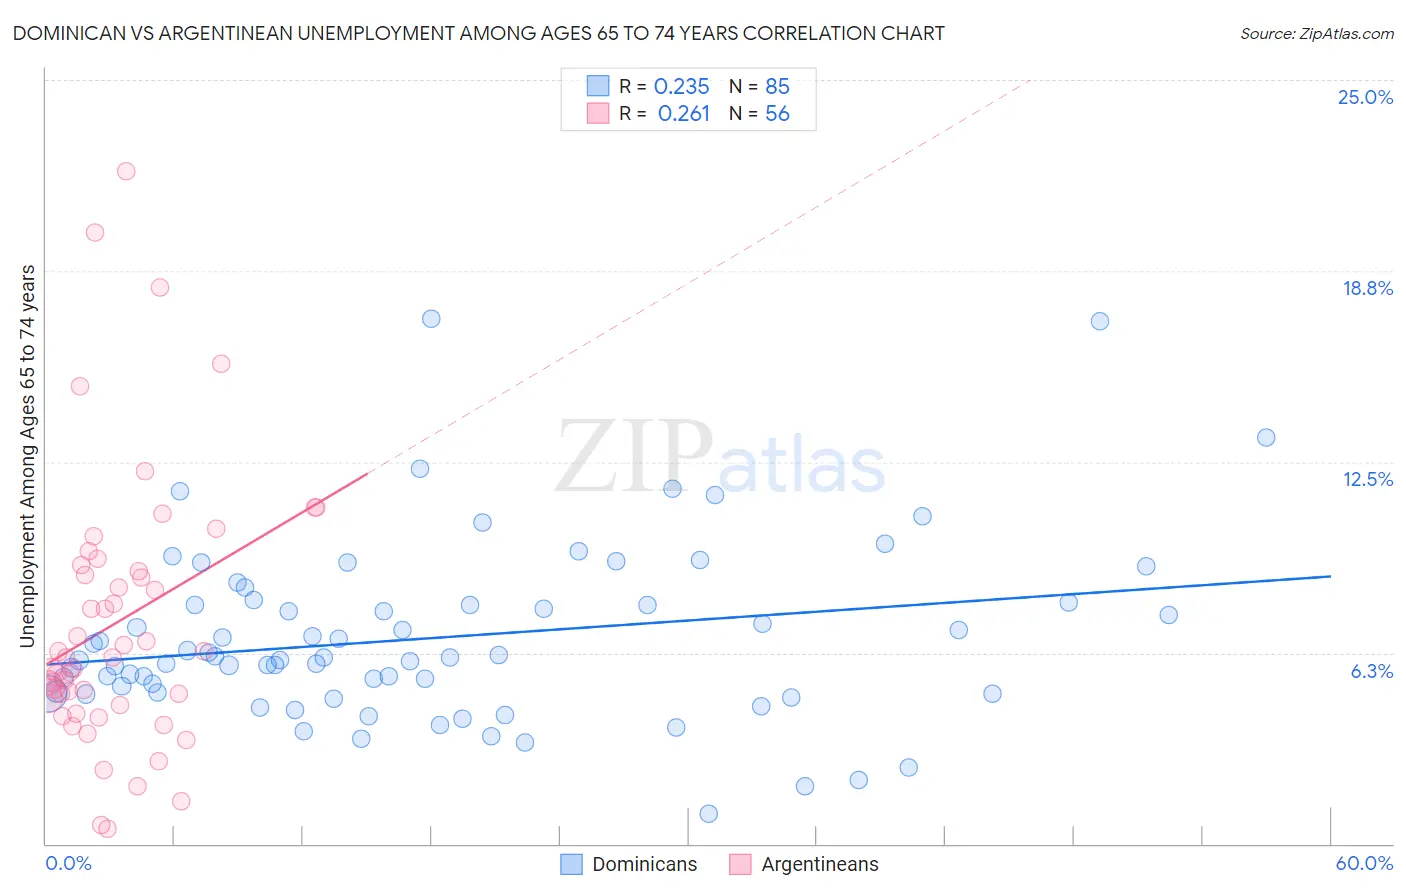 Dominican vs Argentinean Unemployment Among Ages 65 to 74 years